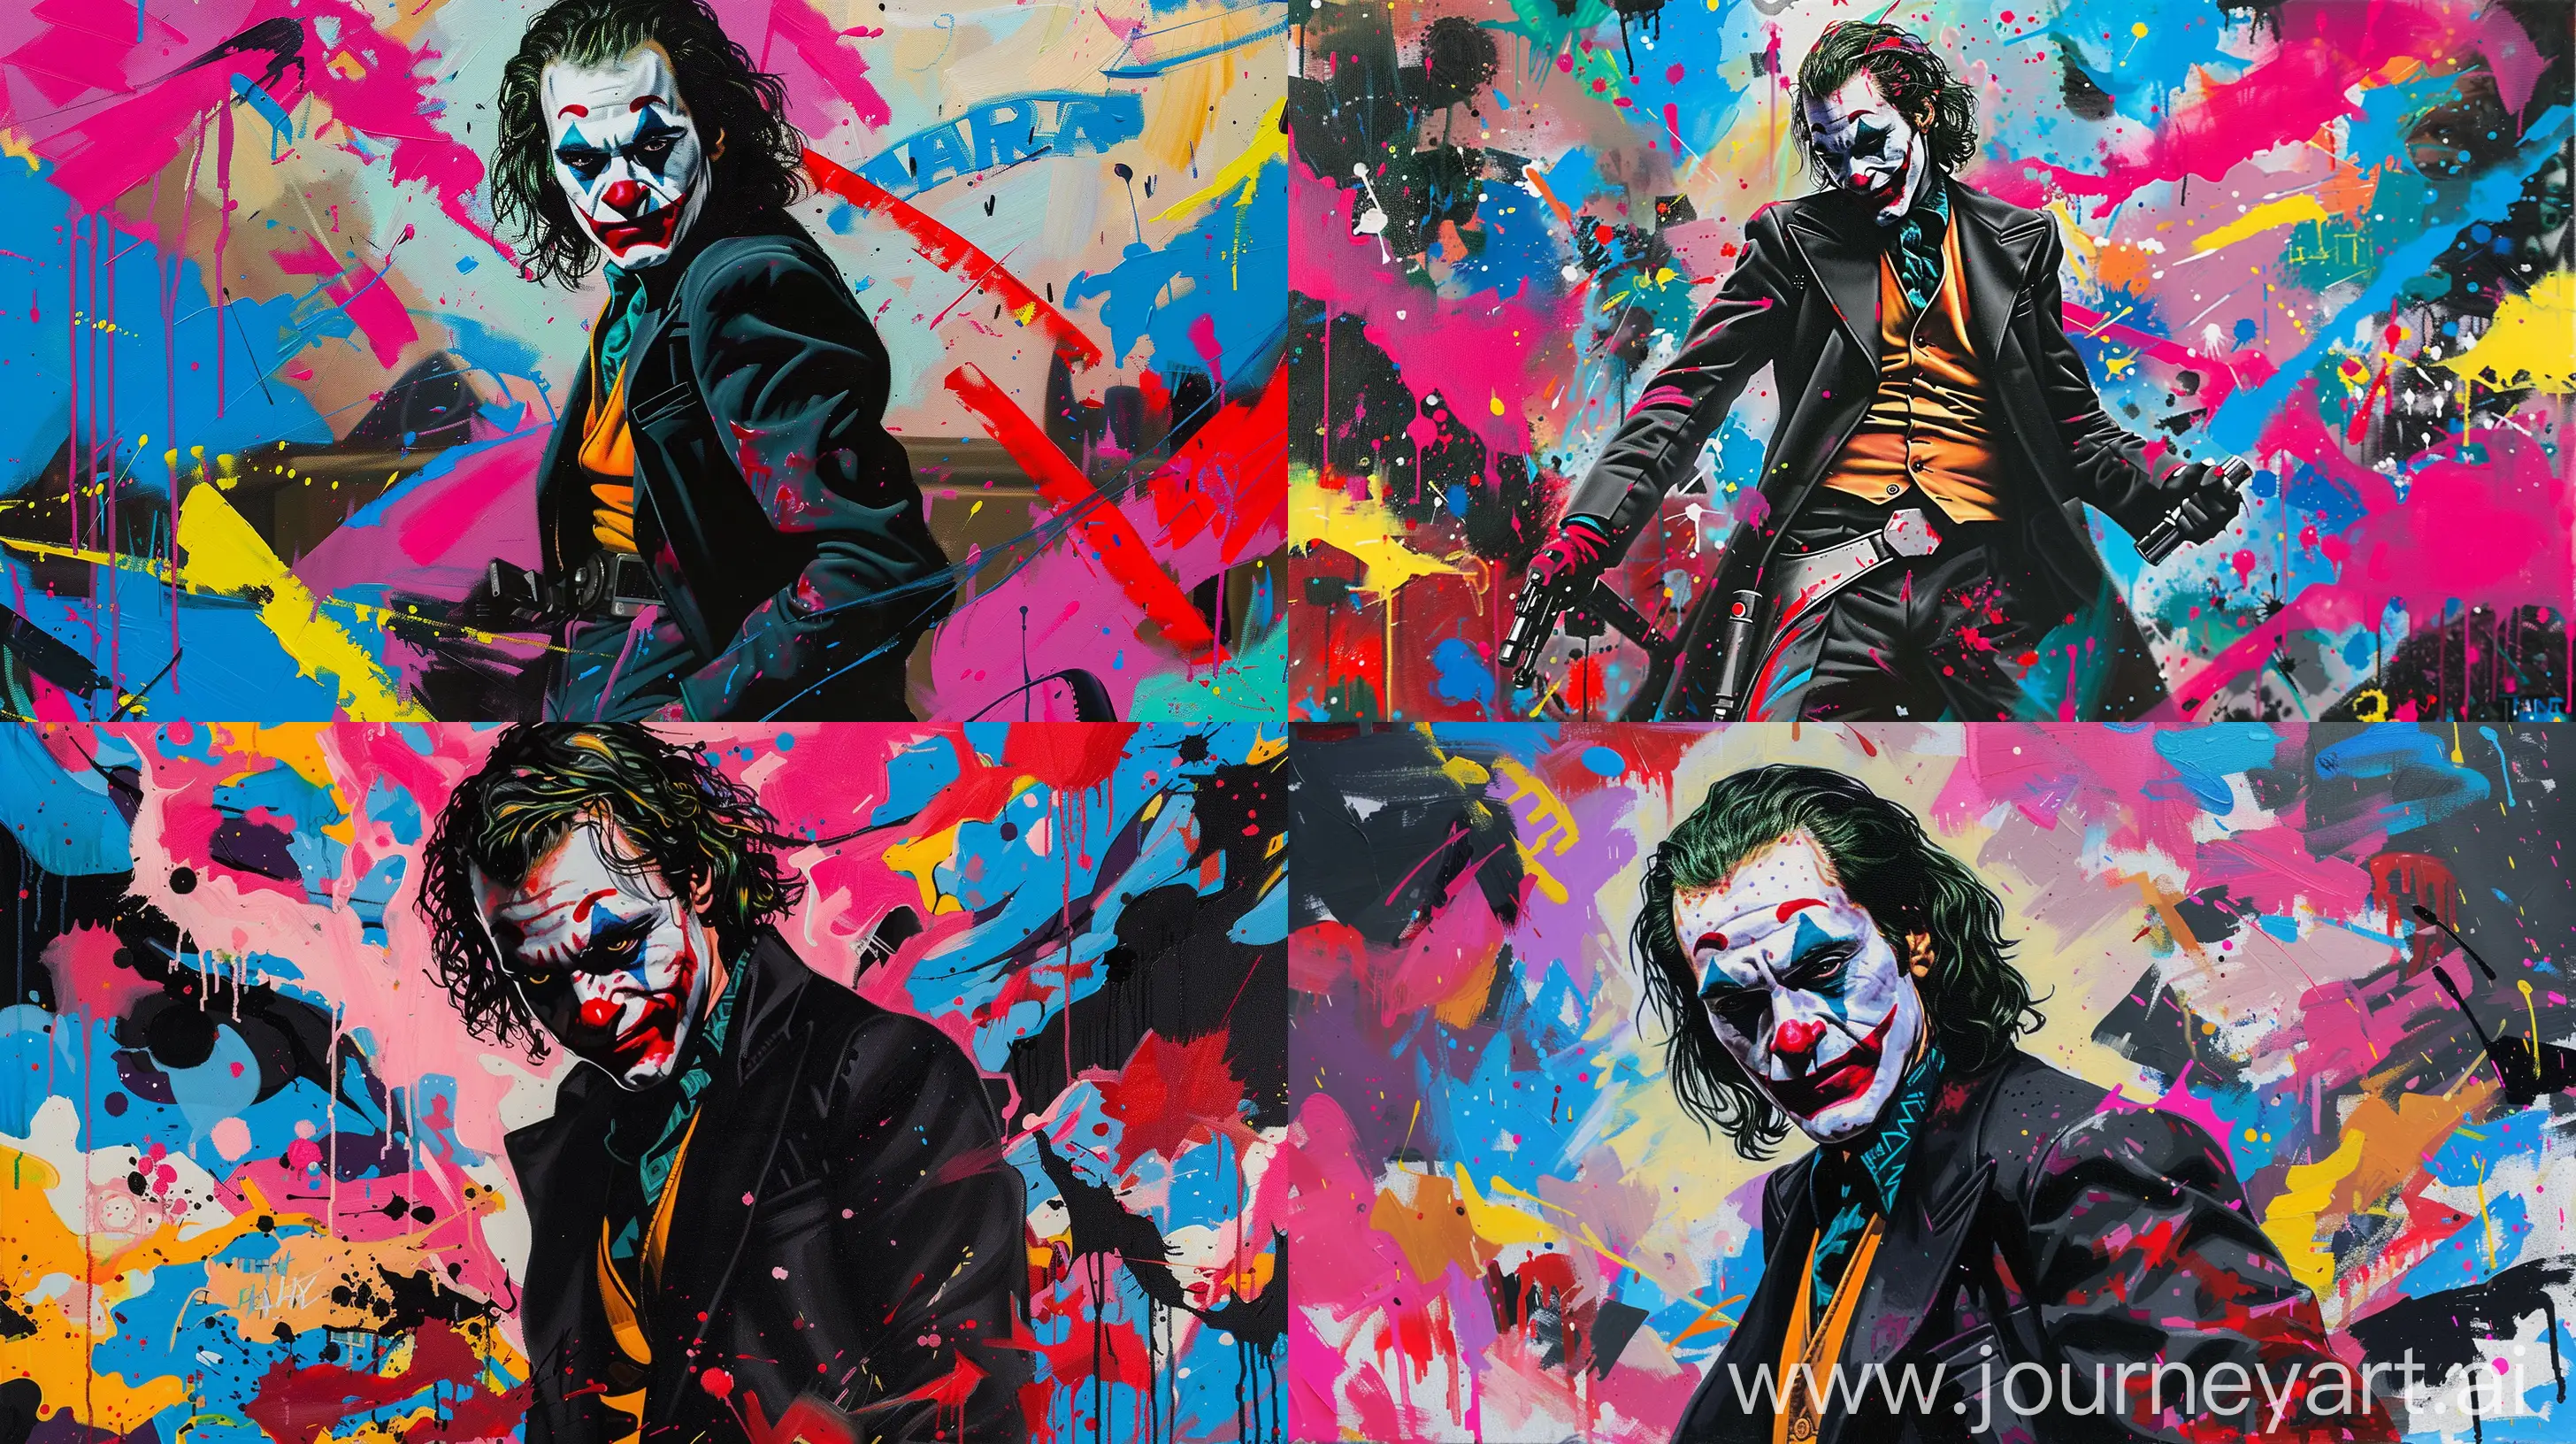 oil painting of heath ledger as joker in star wars style, The overall color palette of the painting should includes vibrant and bright colors, The illustration features predominantly black with red highlights along with a psychedelic background of bright pink, blue, yellow, and other colors. The overall impression is of a high-energy, comic book style action scene with a modern and stylized interpretation of the character. The colors in the image are more on the bright side rather than pastel or moody. --ar  16:9